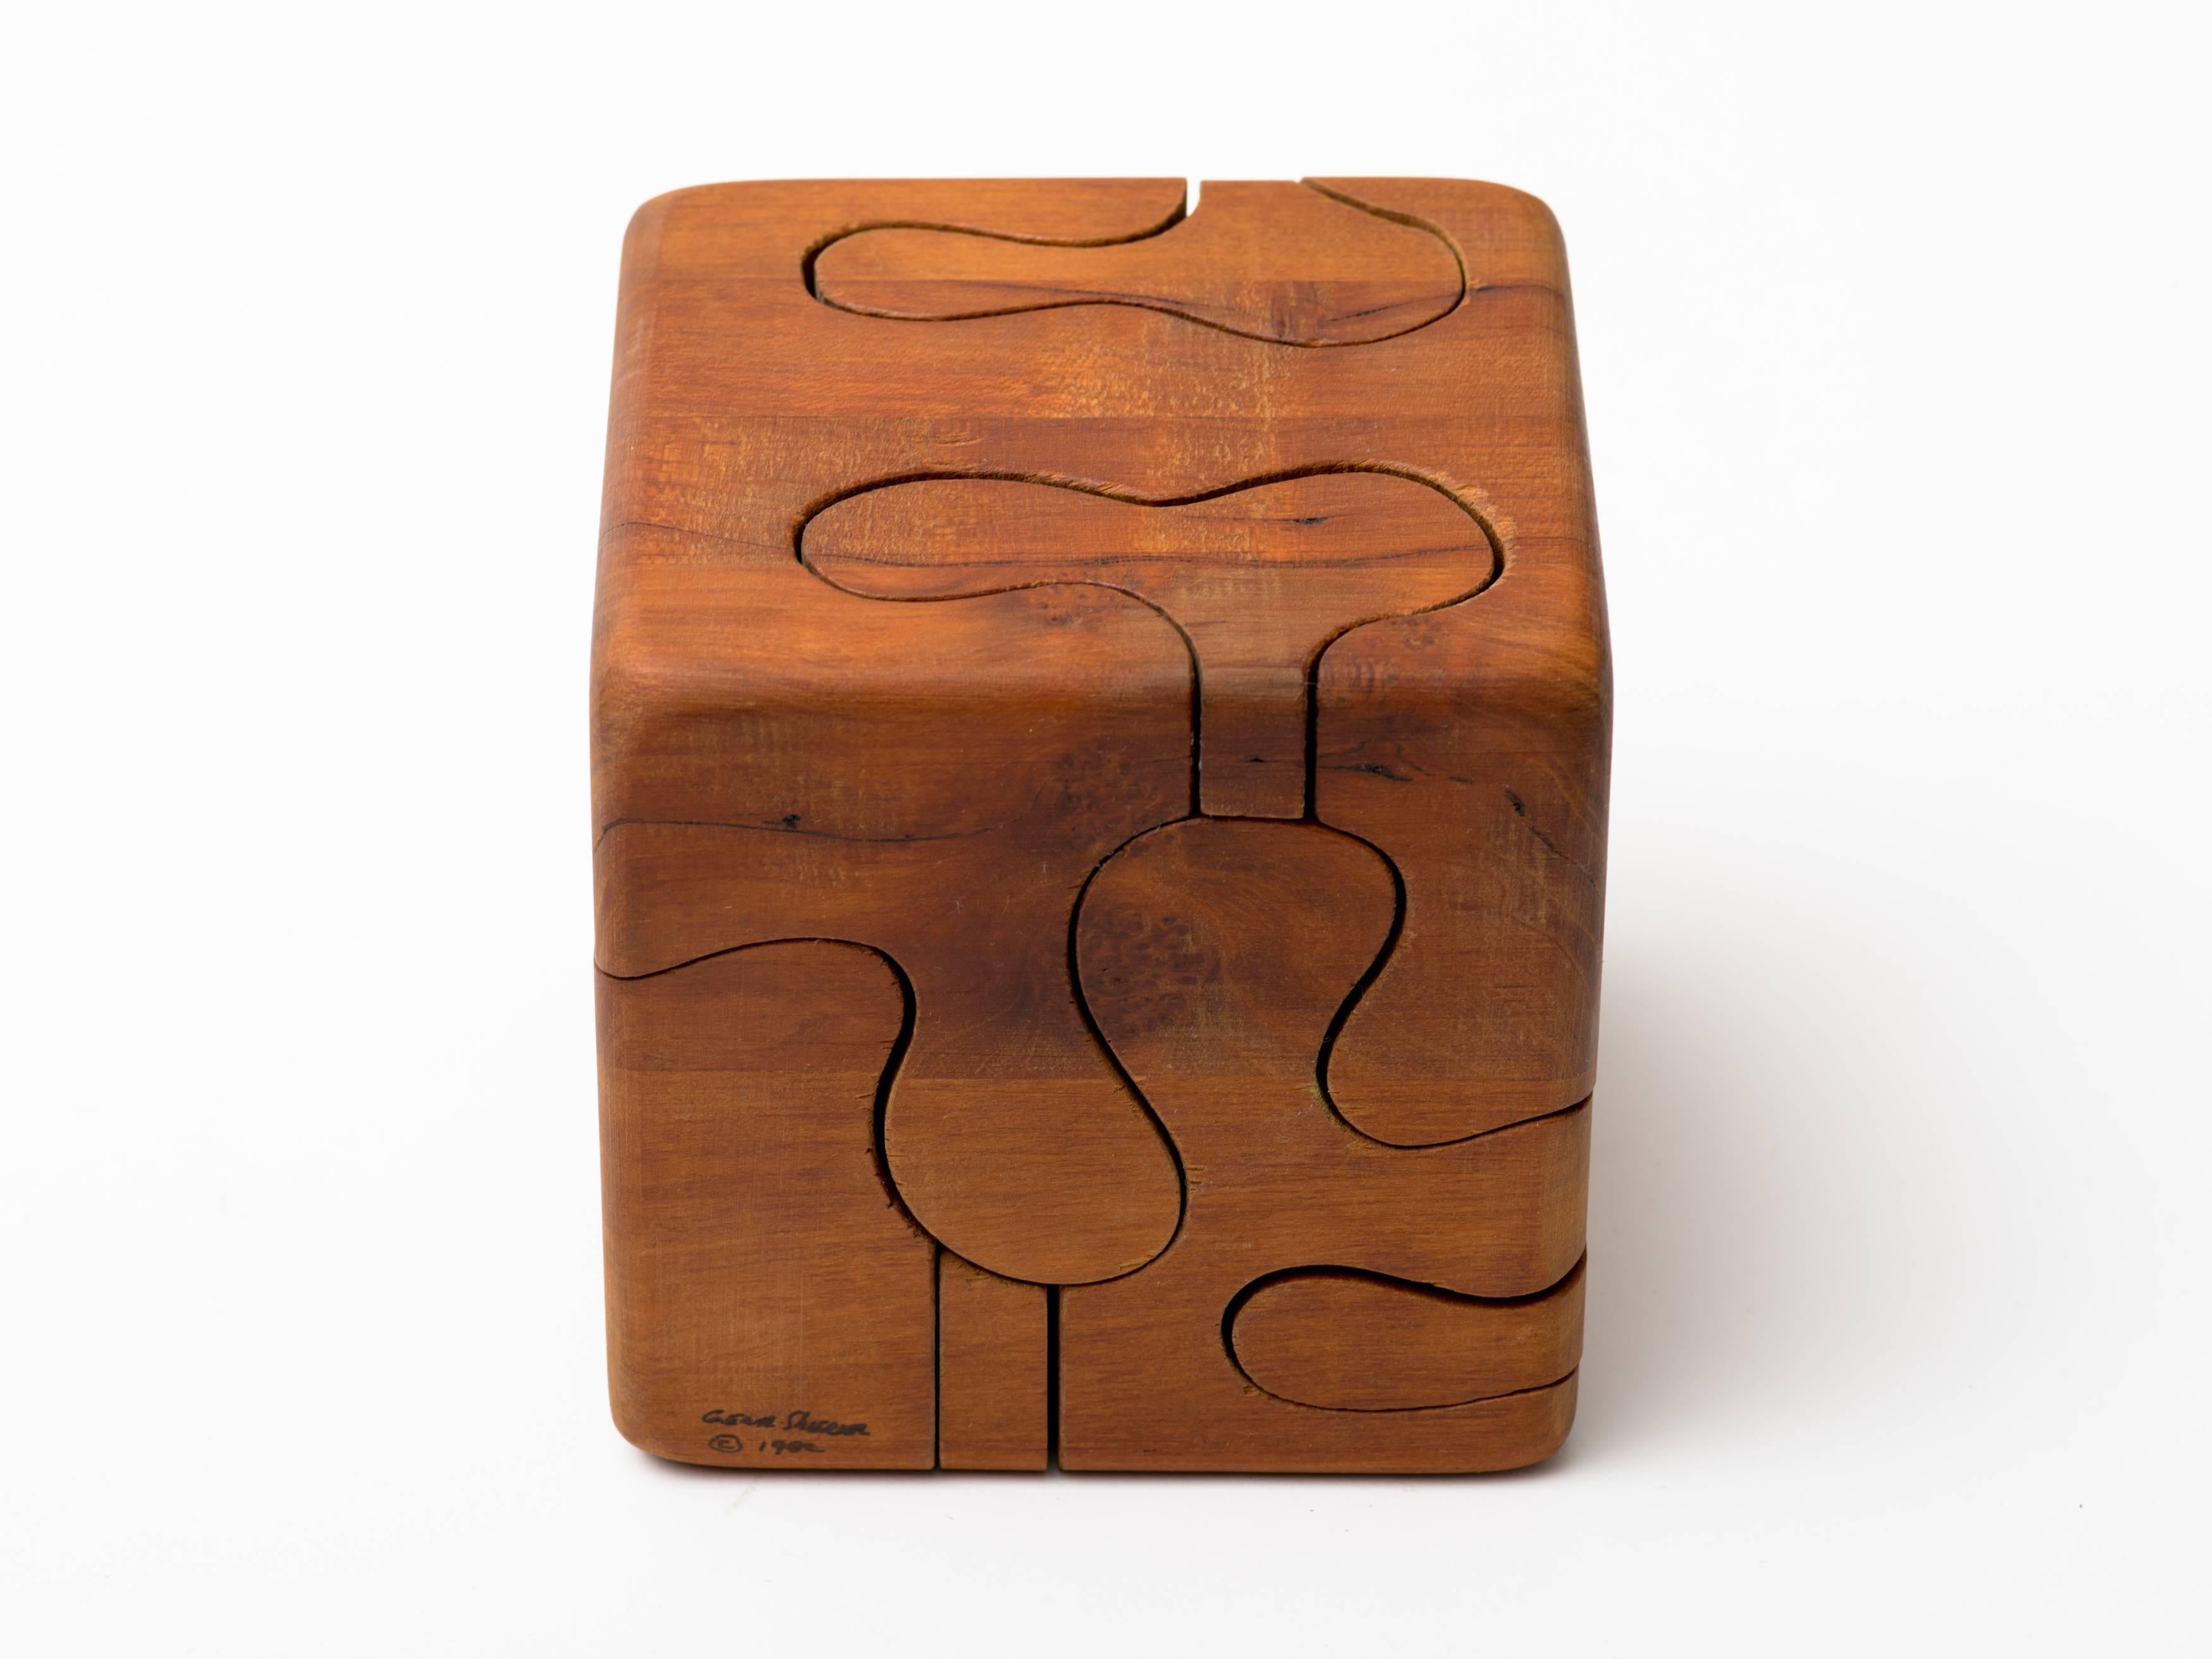 Handcrafted wooden cube puzzle, signed Gene Sherer, 1982.